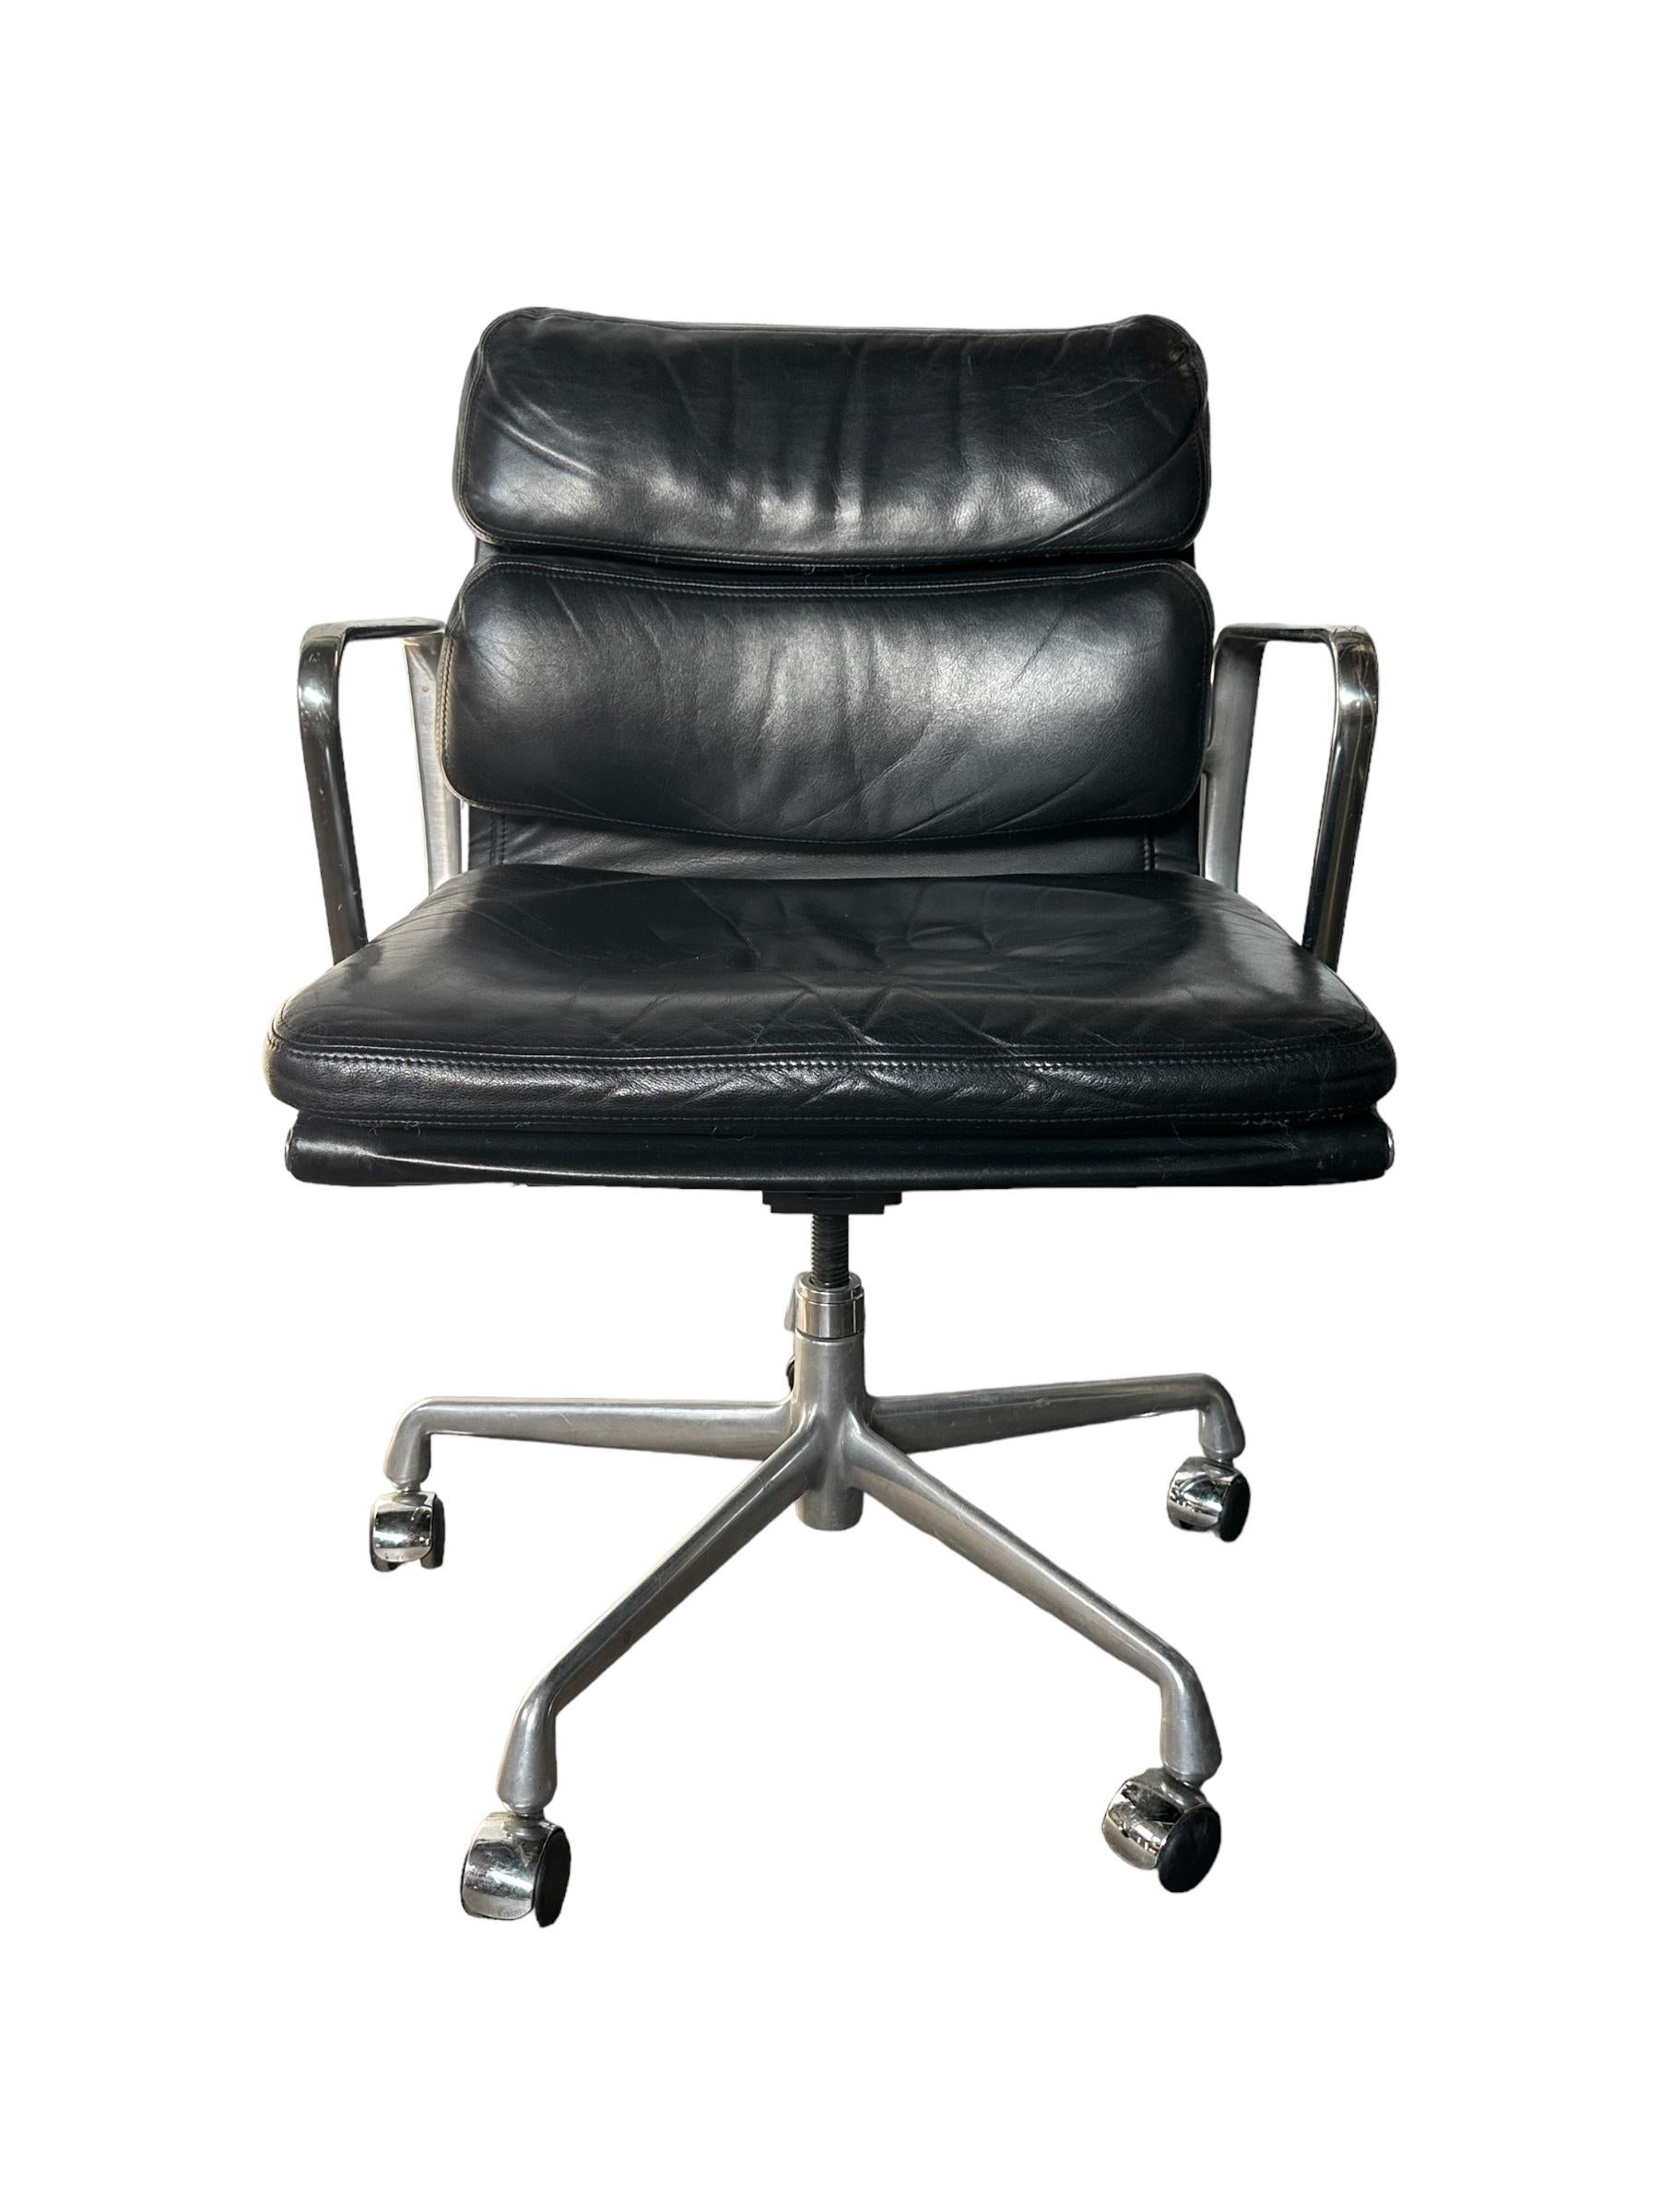 Handsome and elegant Eames soft pad desk/office chair from the Eames Aluminum Group series by Herman Miller. Classic understated design perfection from Charles and Ray Eames. Executed in black leather and aluminum. This model features all the bells